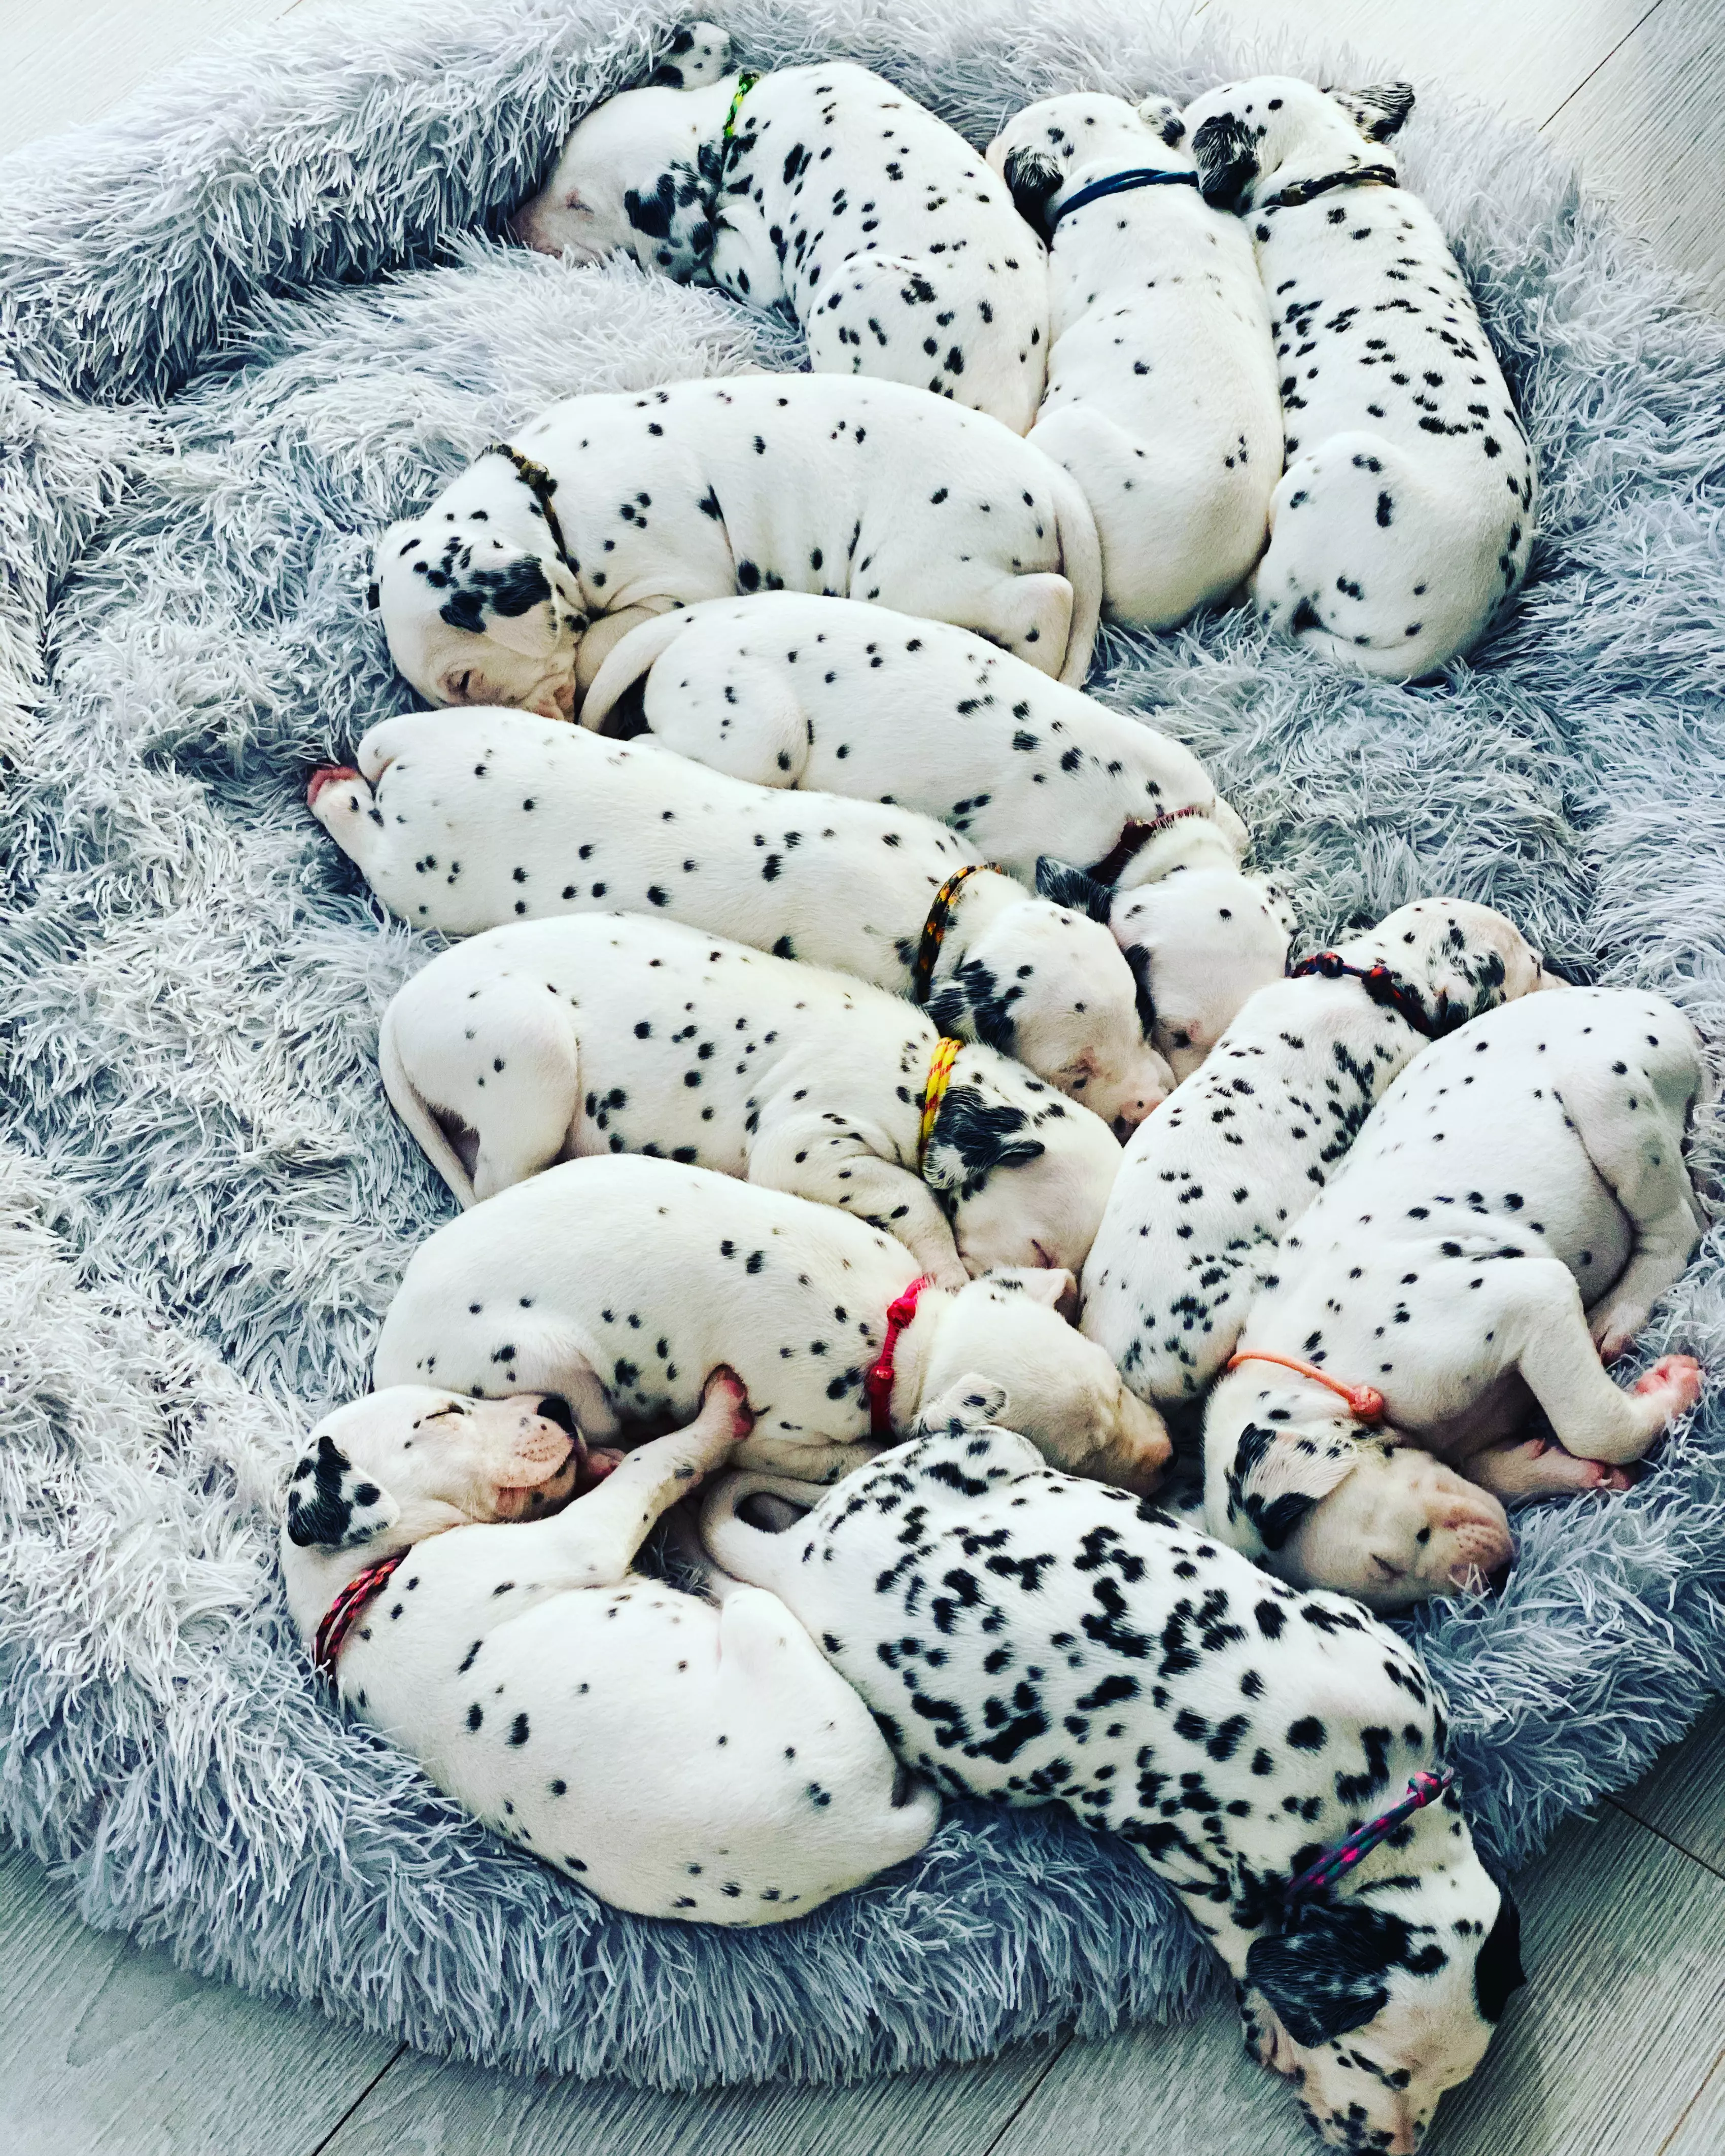 Look at all the adorable little puppies! (